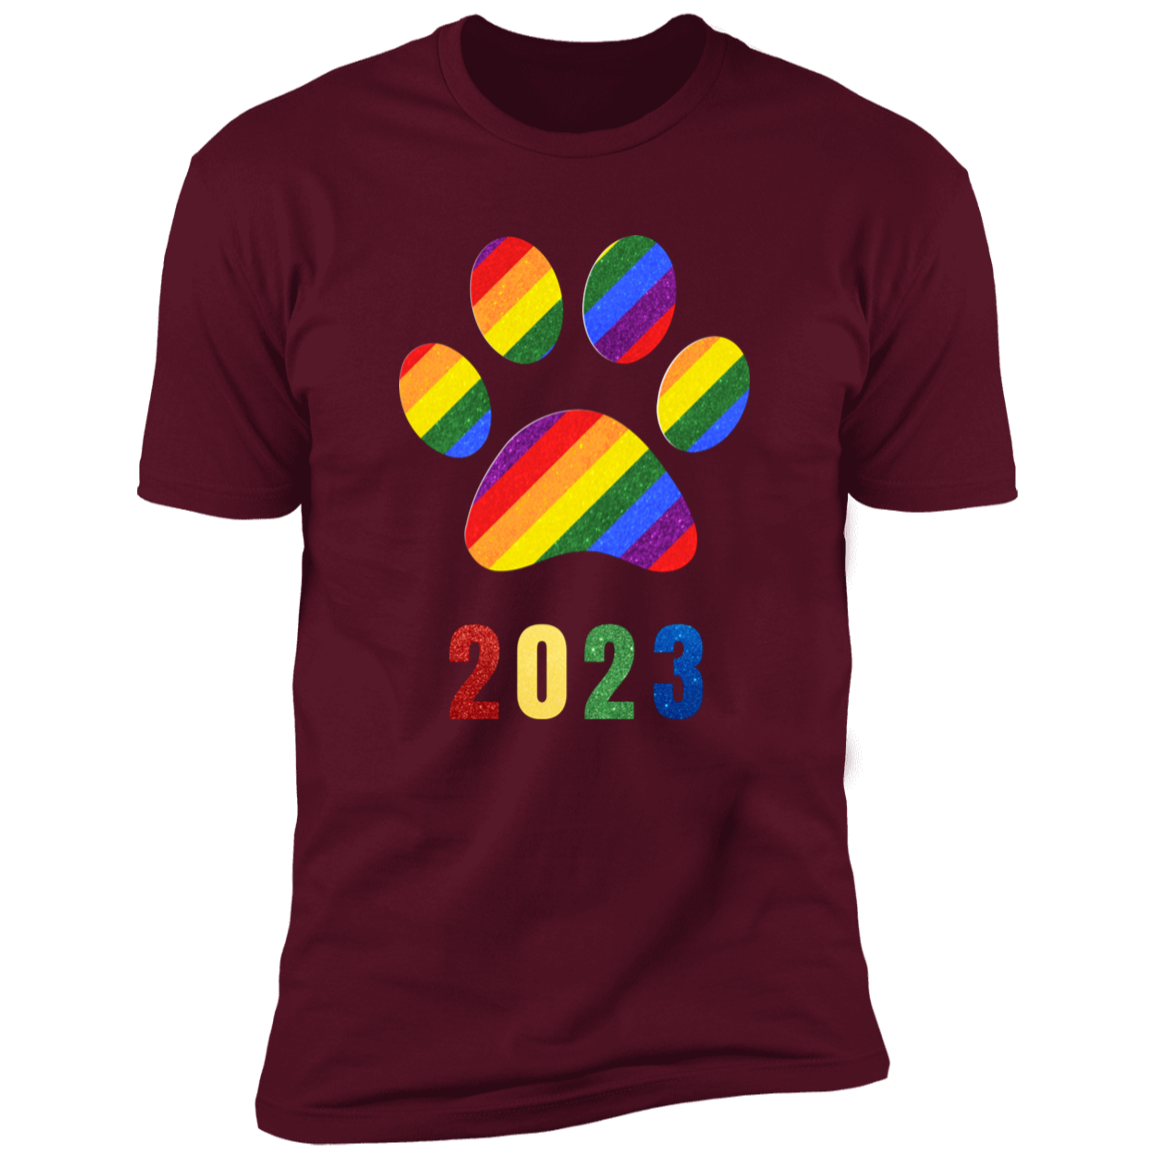 Pride Paw 2023 (Sparkles) Pride T-shirt, Paw Pride Dog Shirt for humans, in maroon